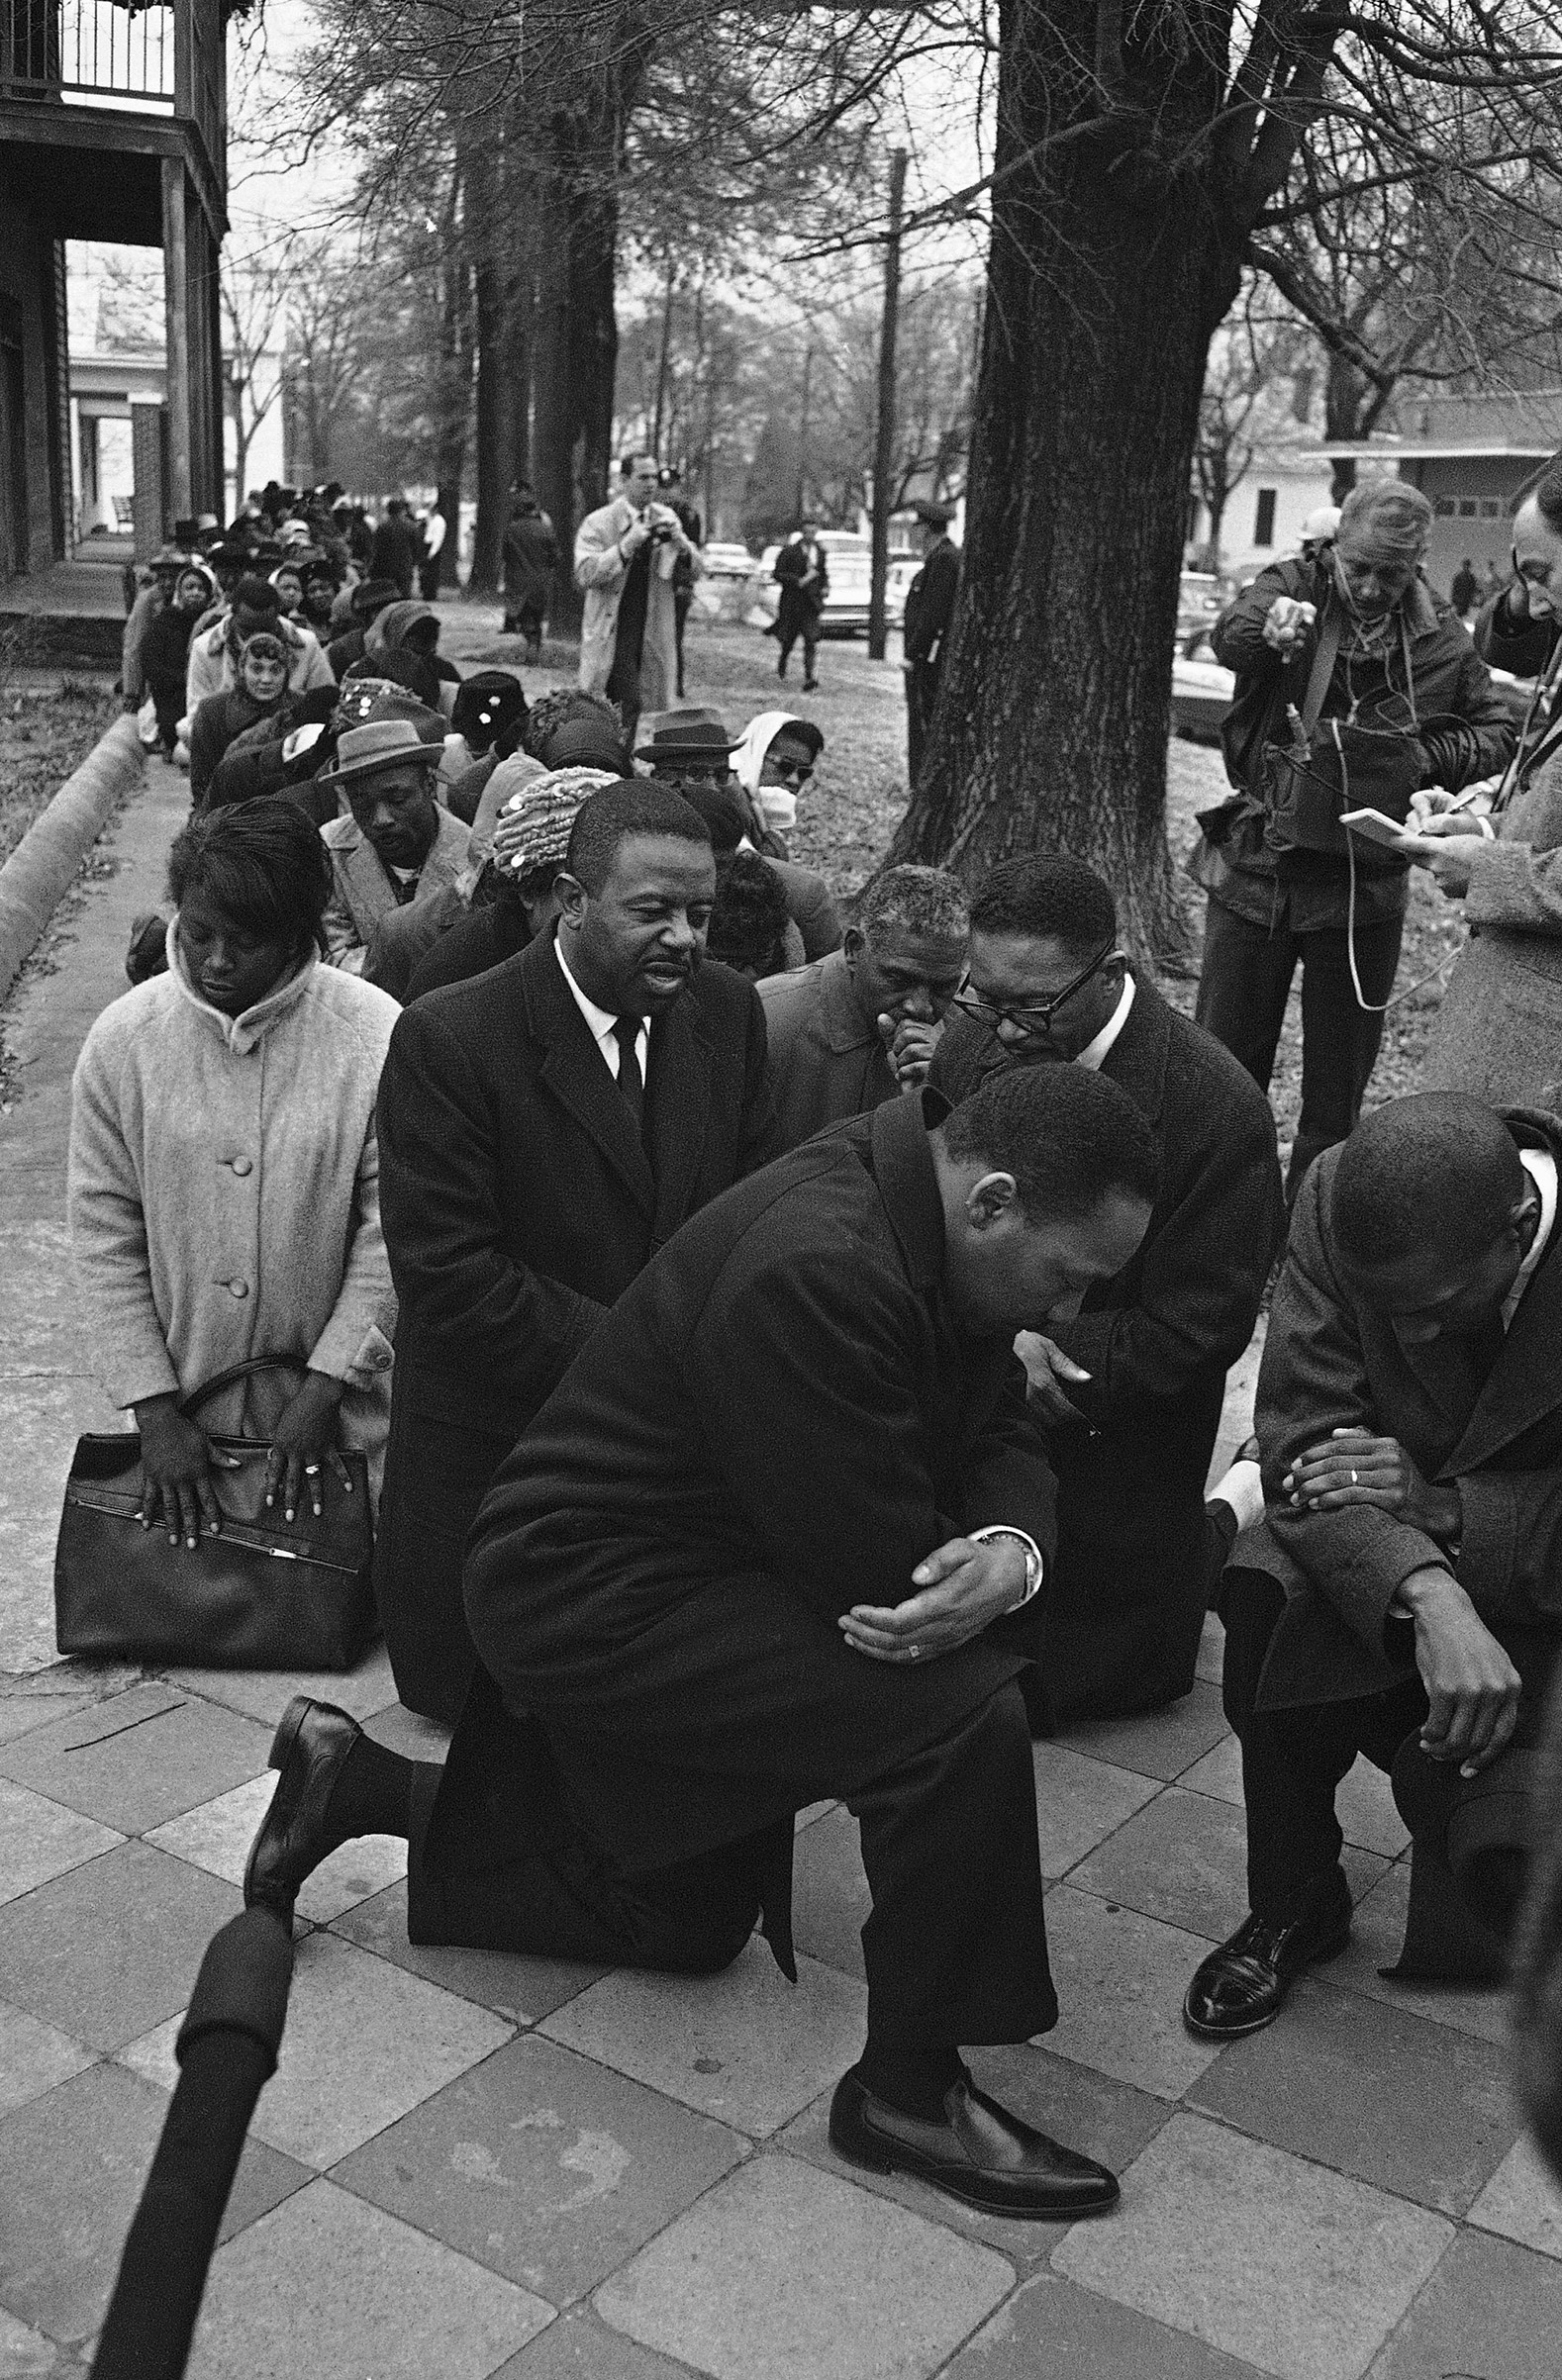 Dr. Martin Luther King Jr., center, leads a group of civil rights workers and Selma black people in prayer on Feb. 1, 1965 in Selma, Alabama after they were arrested on charges of parading without a permit. More than 250 persons were arrested as they marched to the Dallas County courthouse as part of a voter registration drive. (BH—AP Photo)